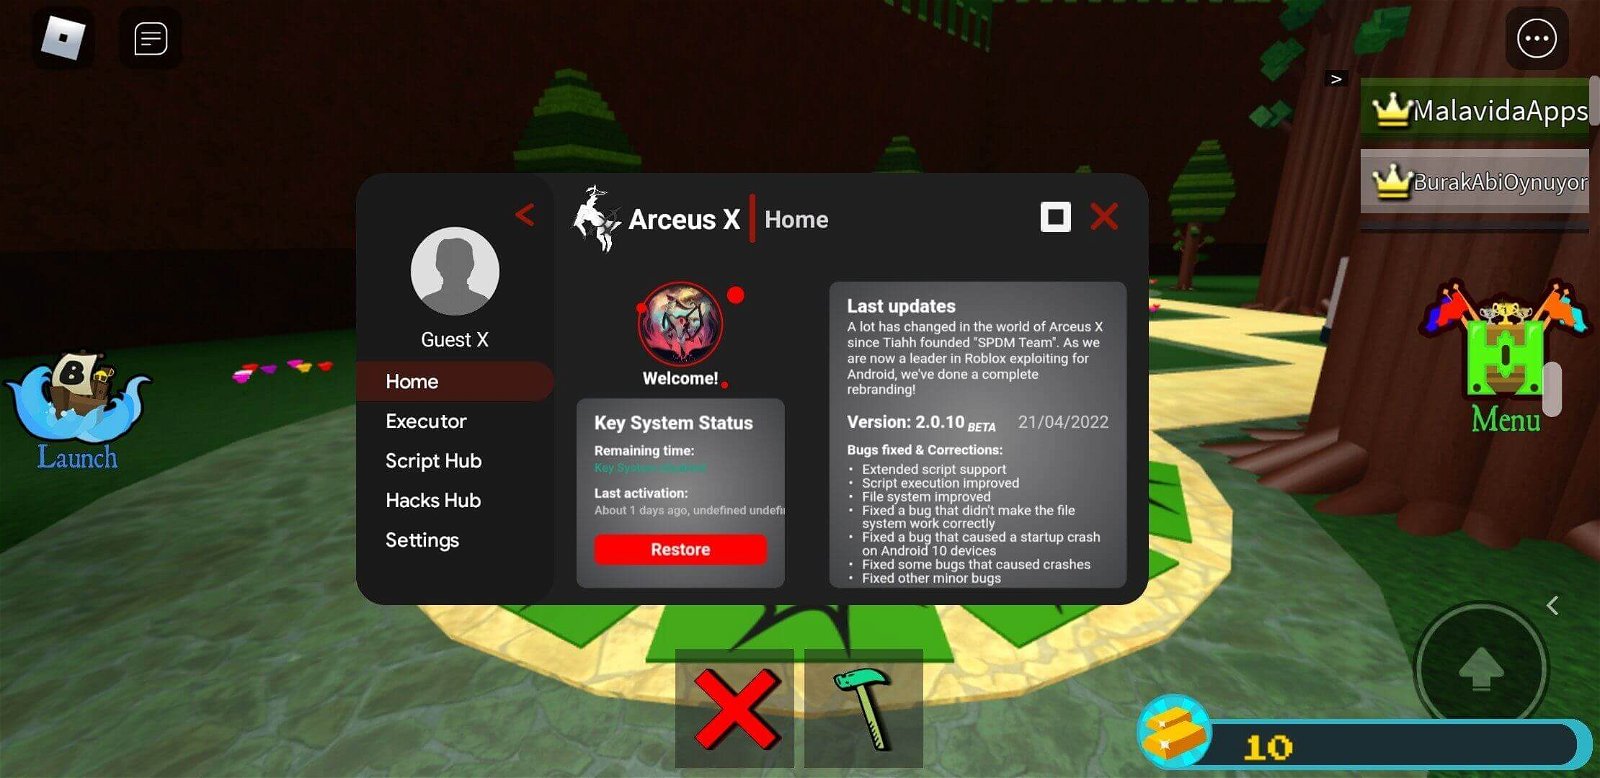 HOW TO INSTALL ARCEUS X V3 MOBILE WITH KEY TUTORIAL AND BLOXFRUIT